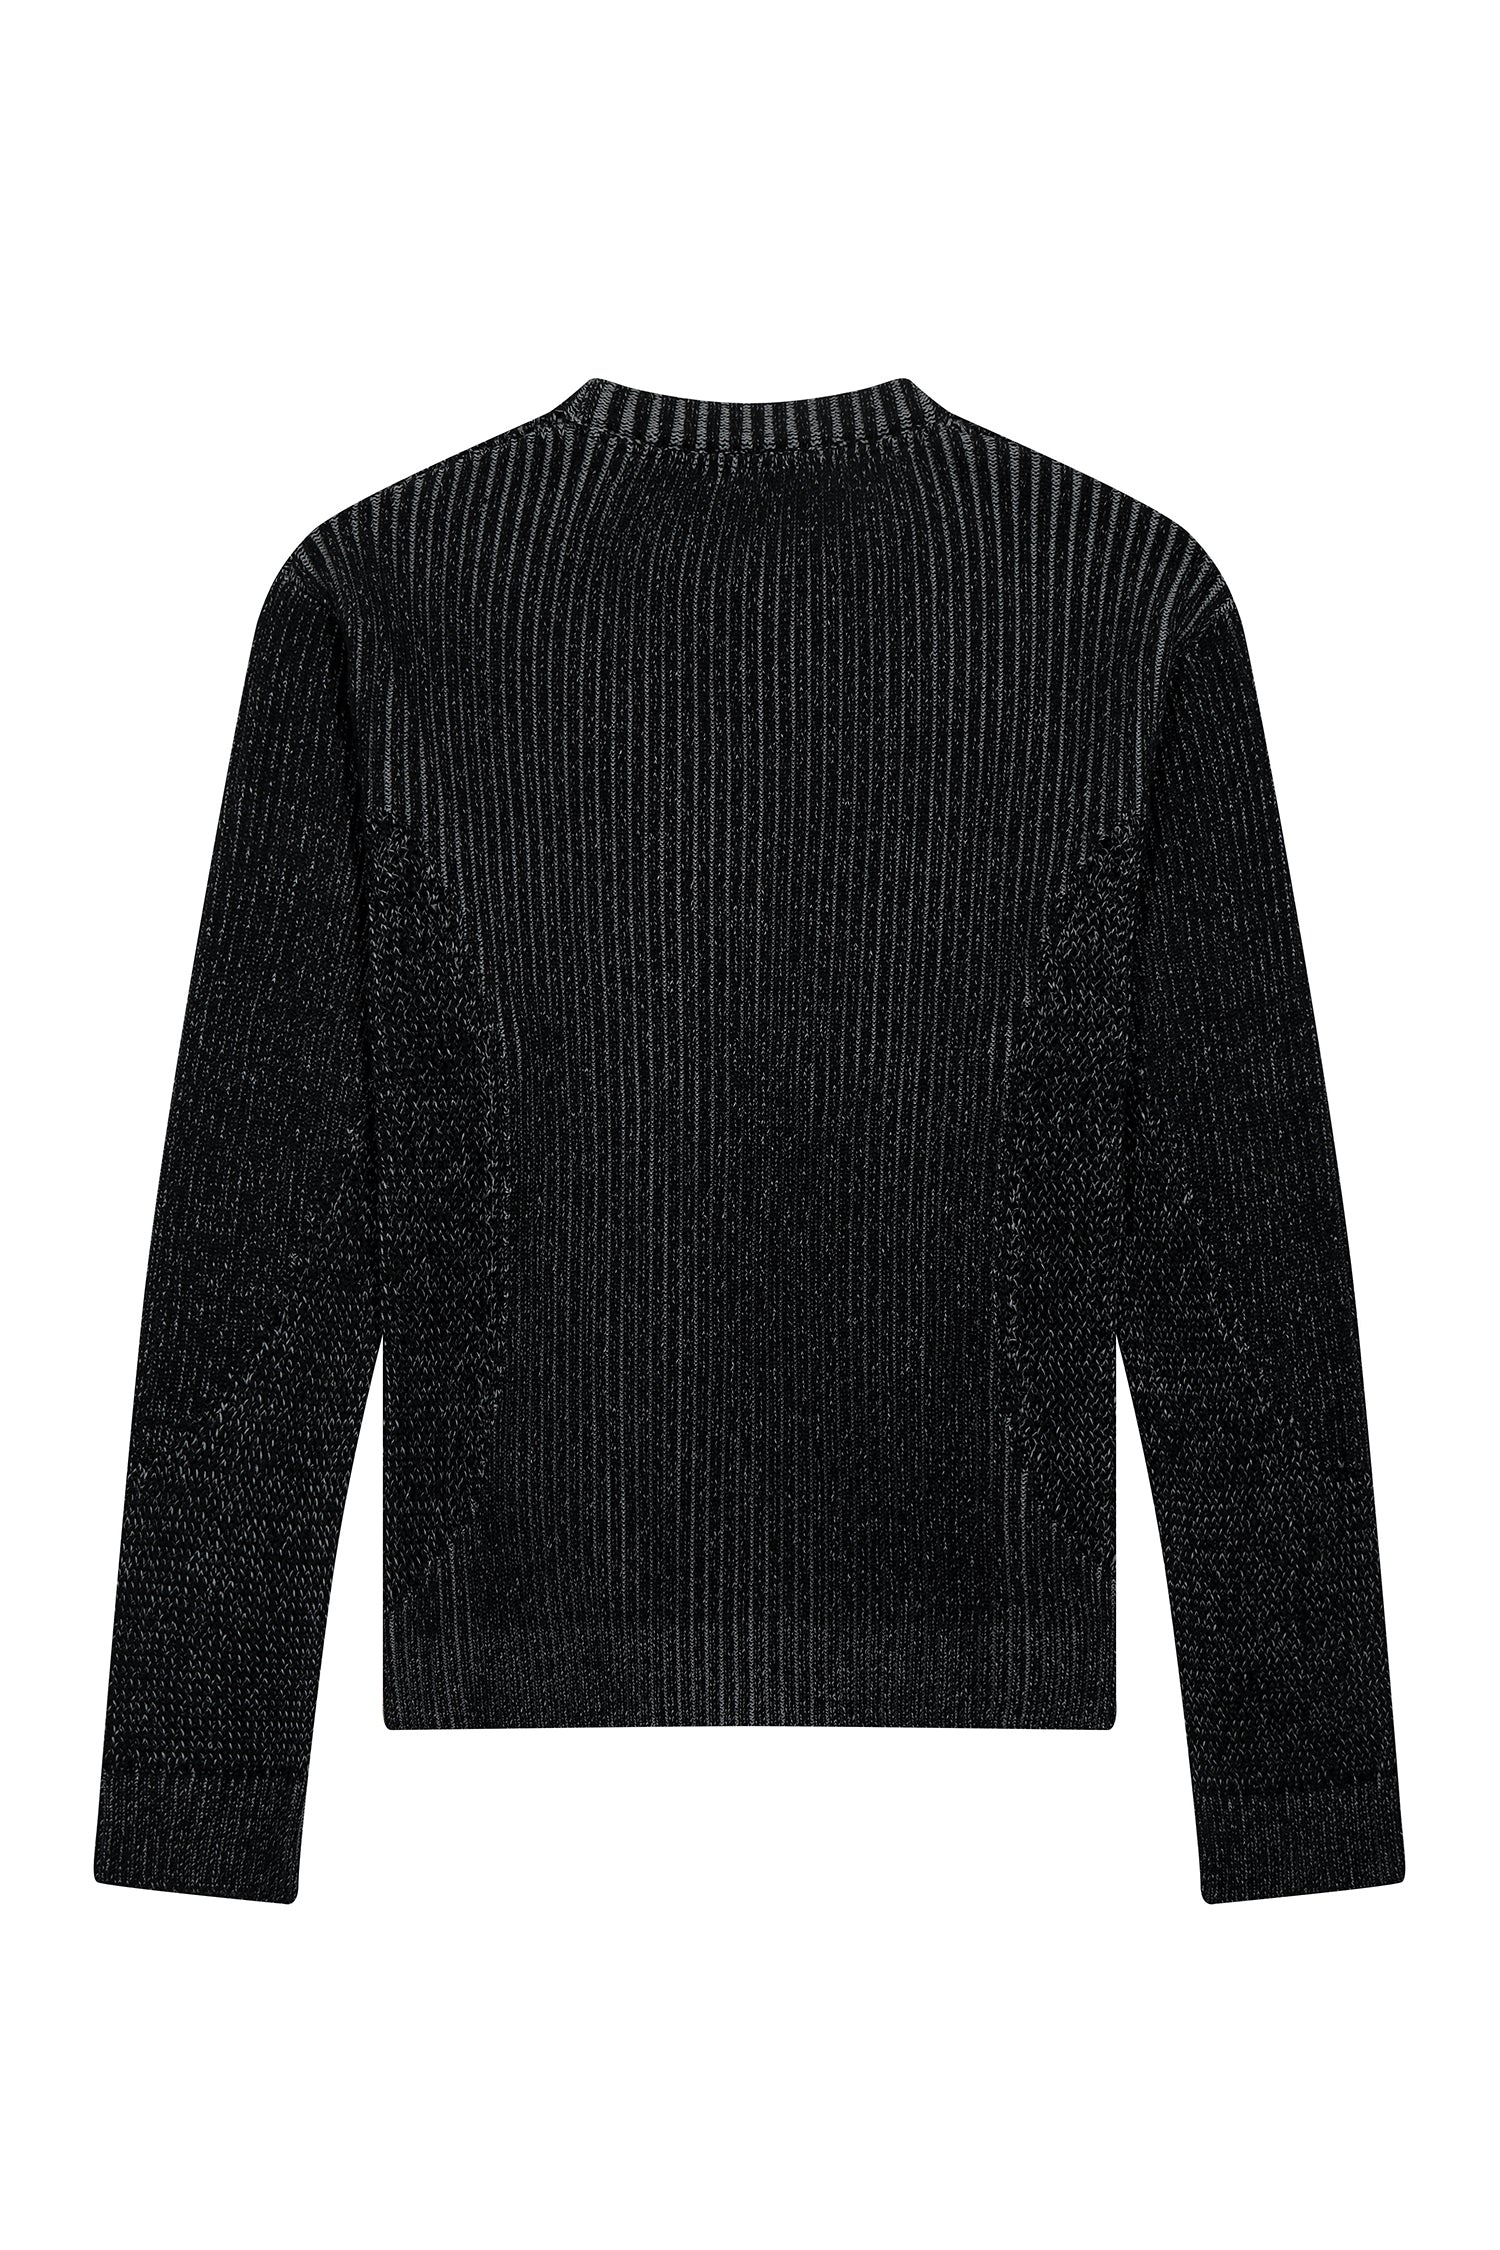 Oasis Knitted Pullover Sweater